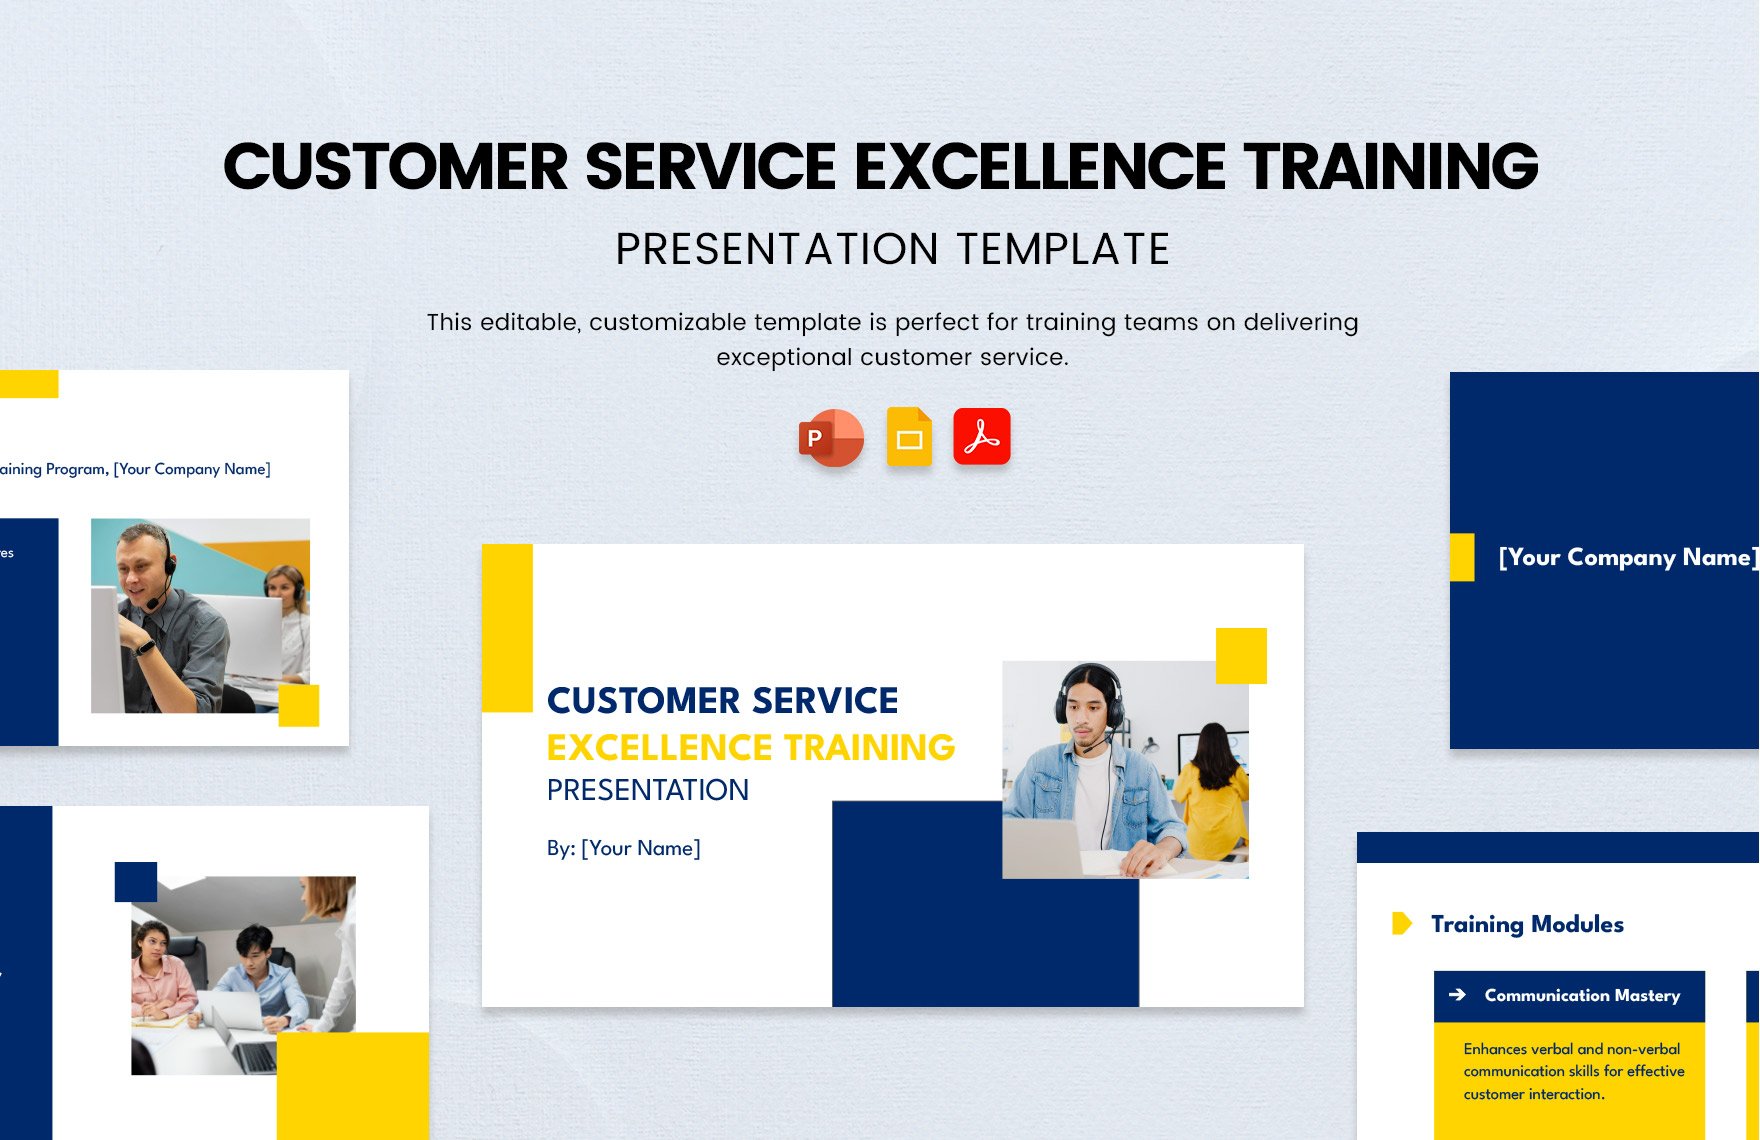 Free Customer Service Excellence Training Presentation Template